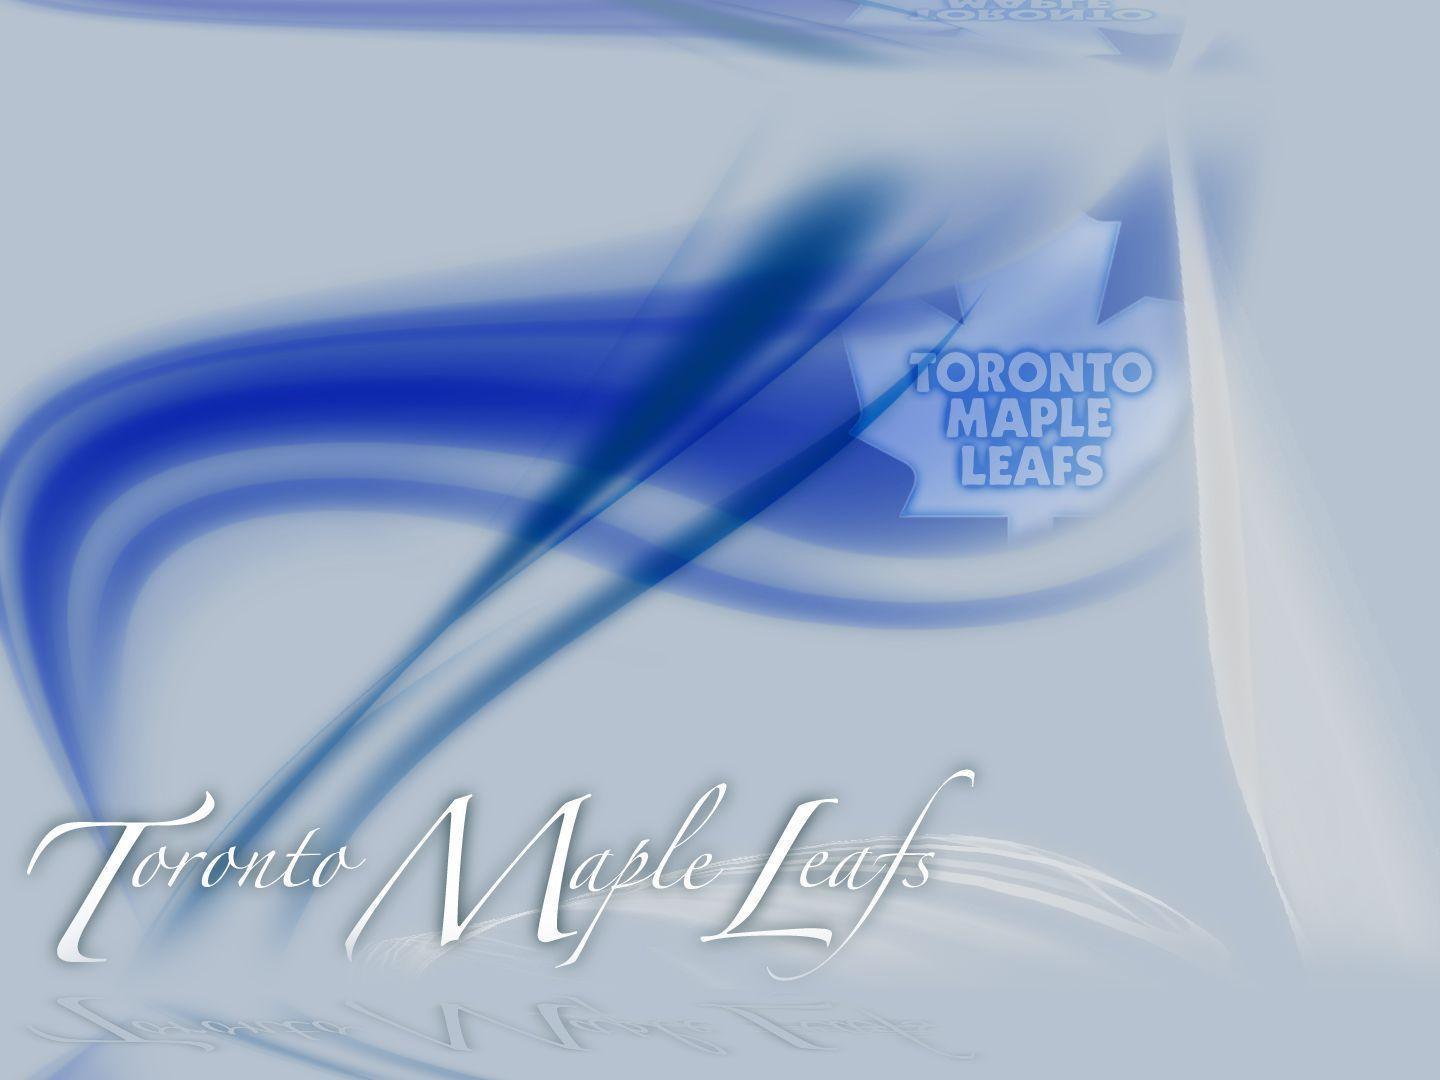 Wallpaper of the day: Toronto Maple Leafs. Toronto Maple Leafs